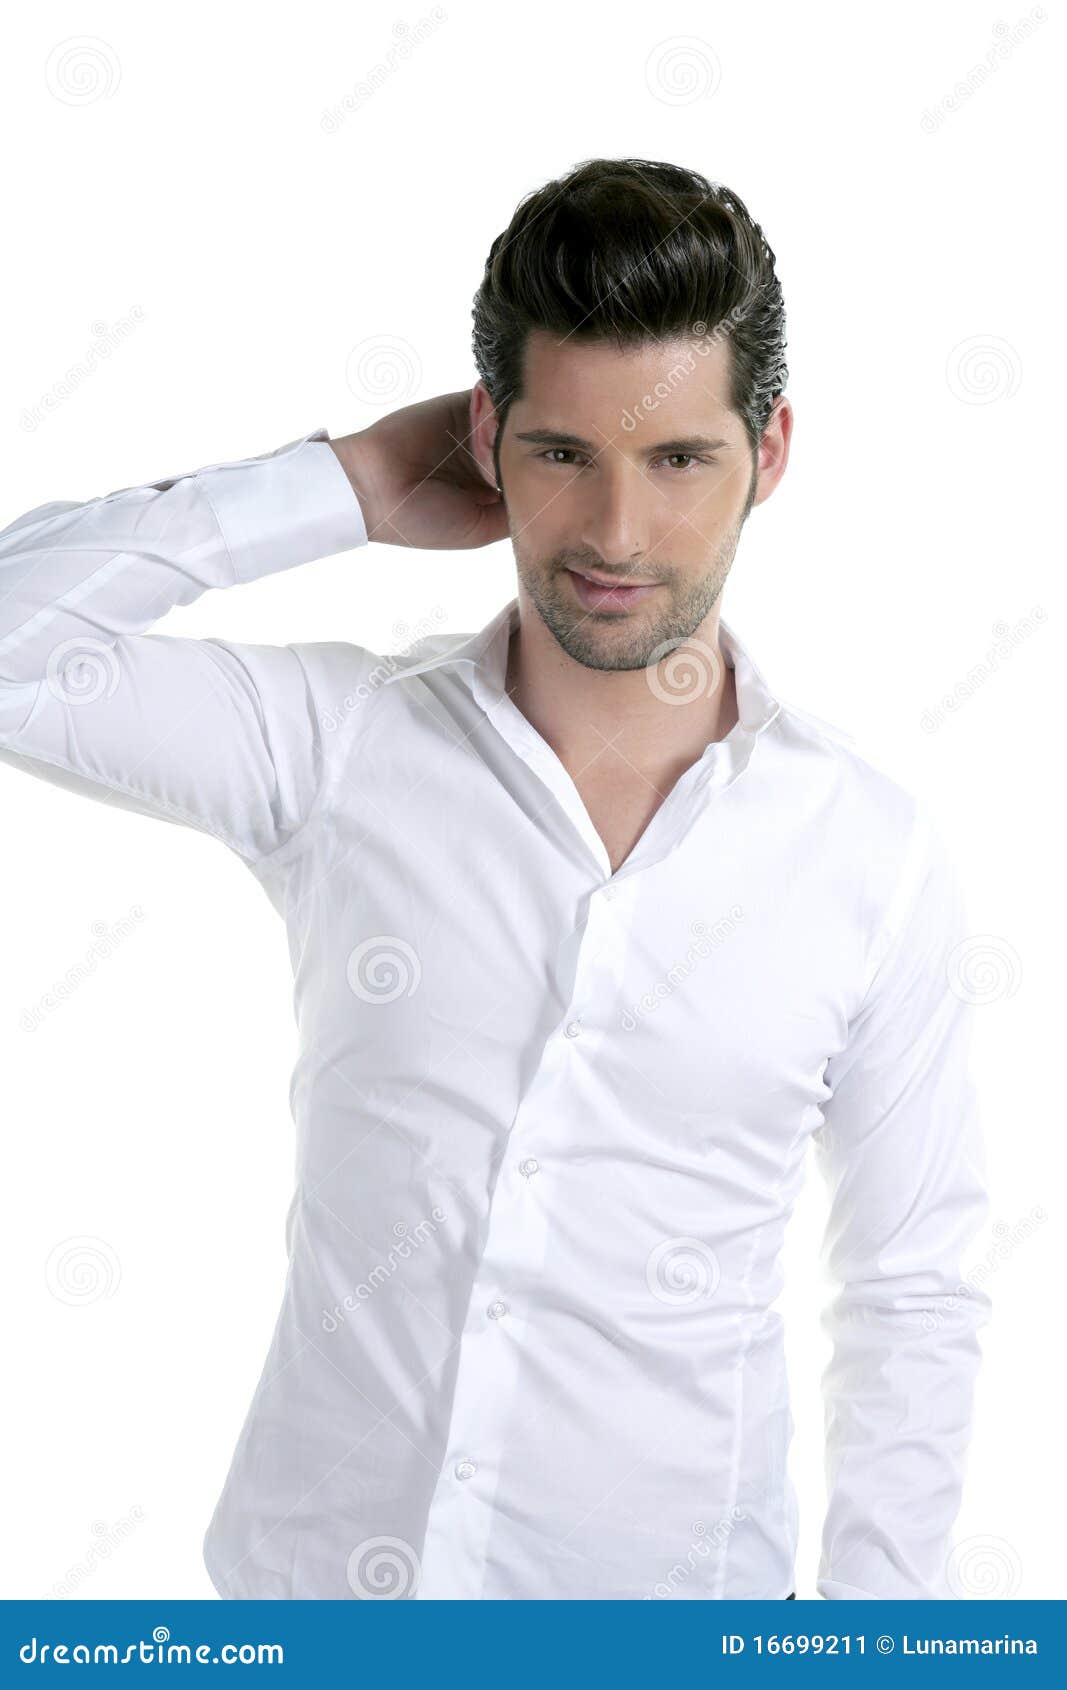 Handsome Young Man Portrait Posing Stock Image - Image of expressive ...